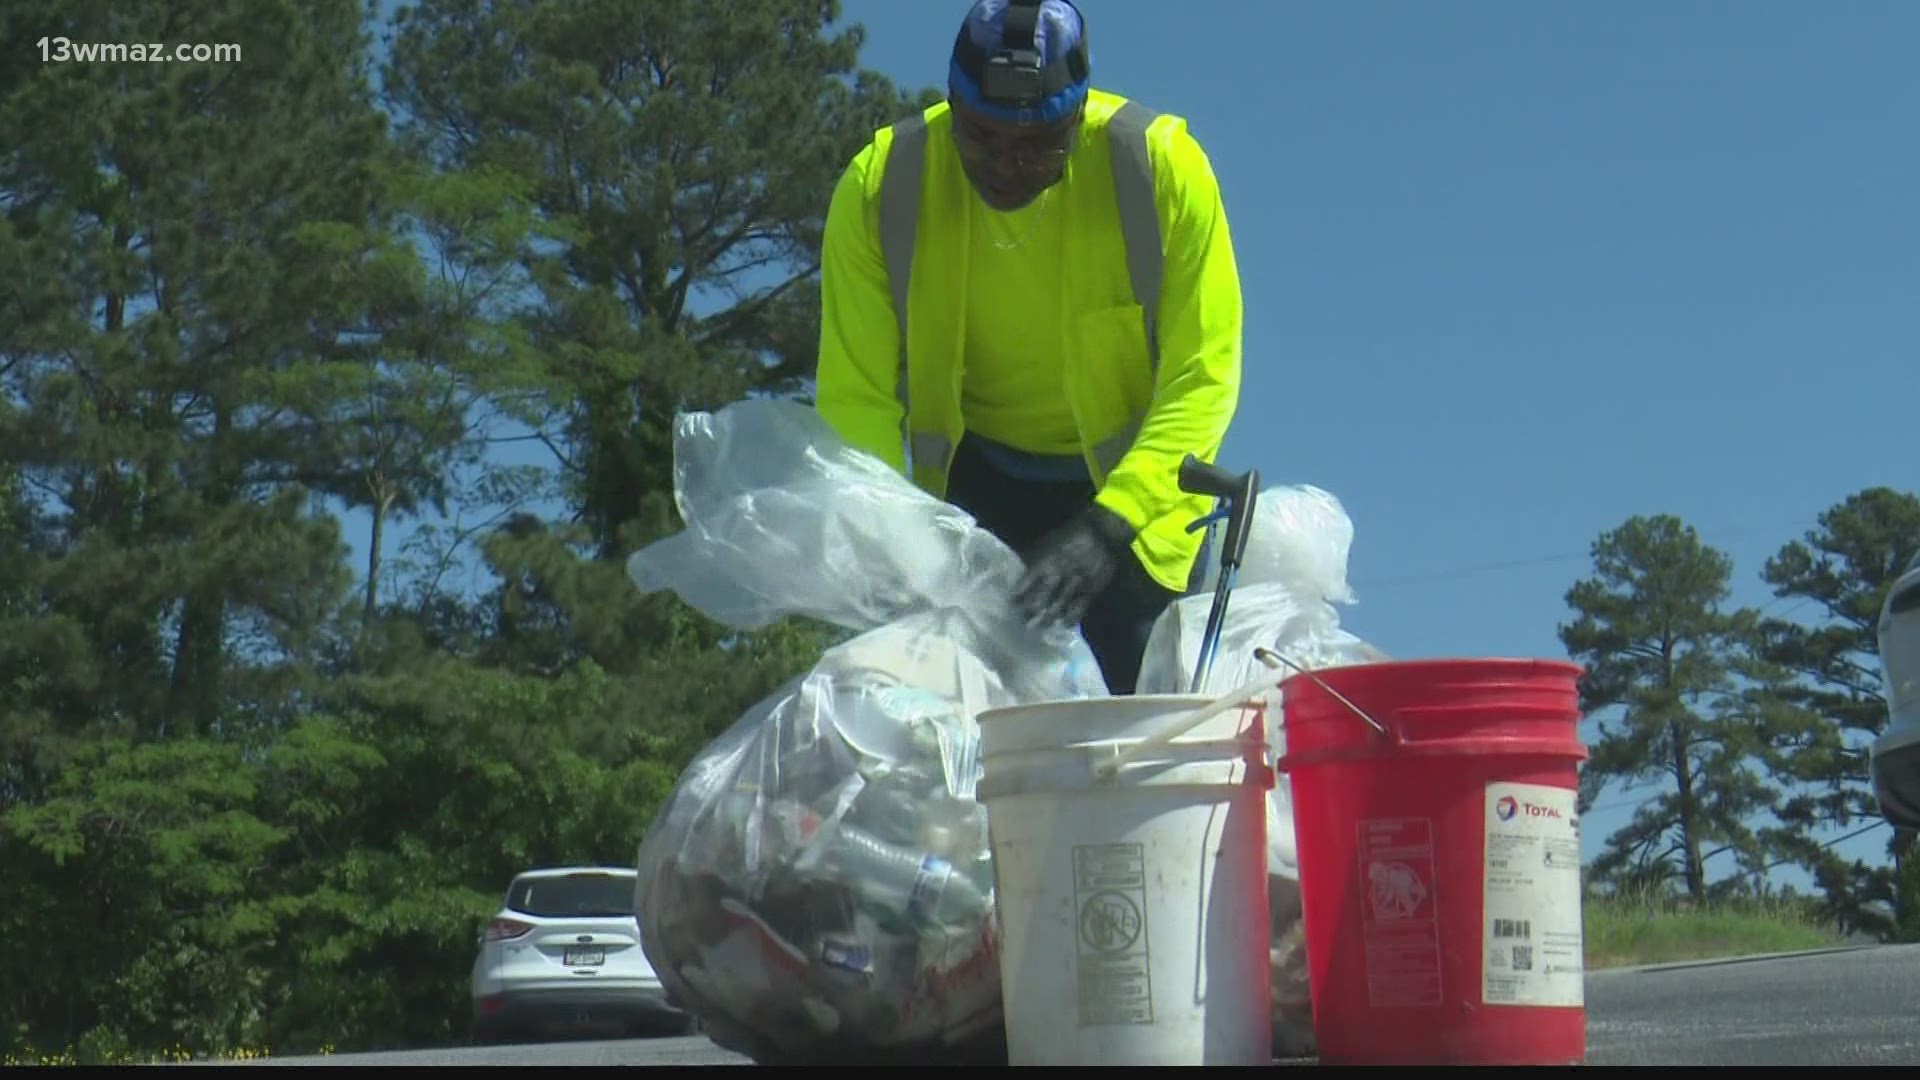 Public Works Department employees who work to keep Warner Robins clean are now asking citizens to have some compassion when it comes to tossing trash.